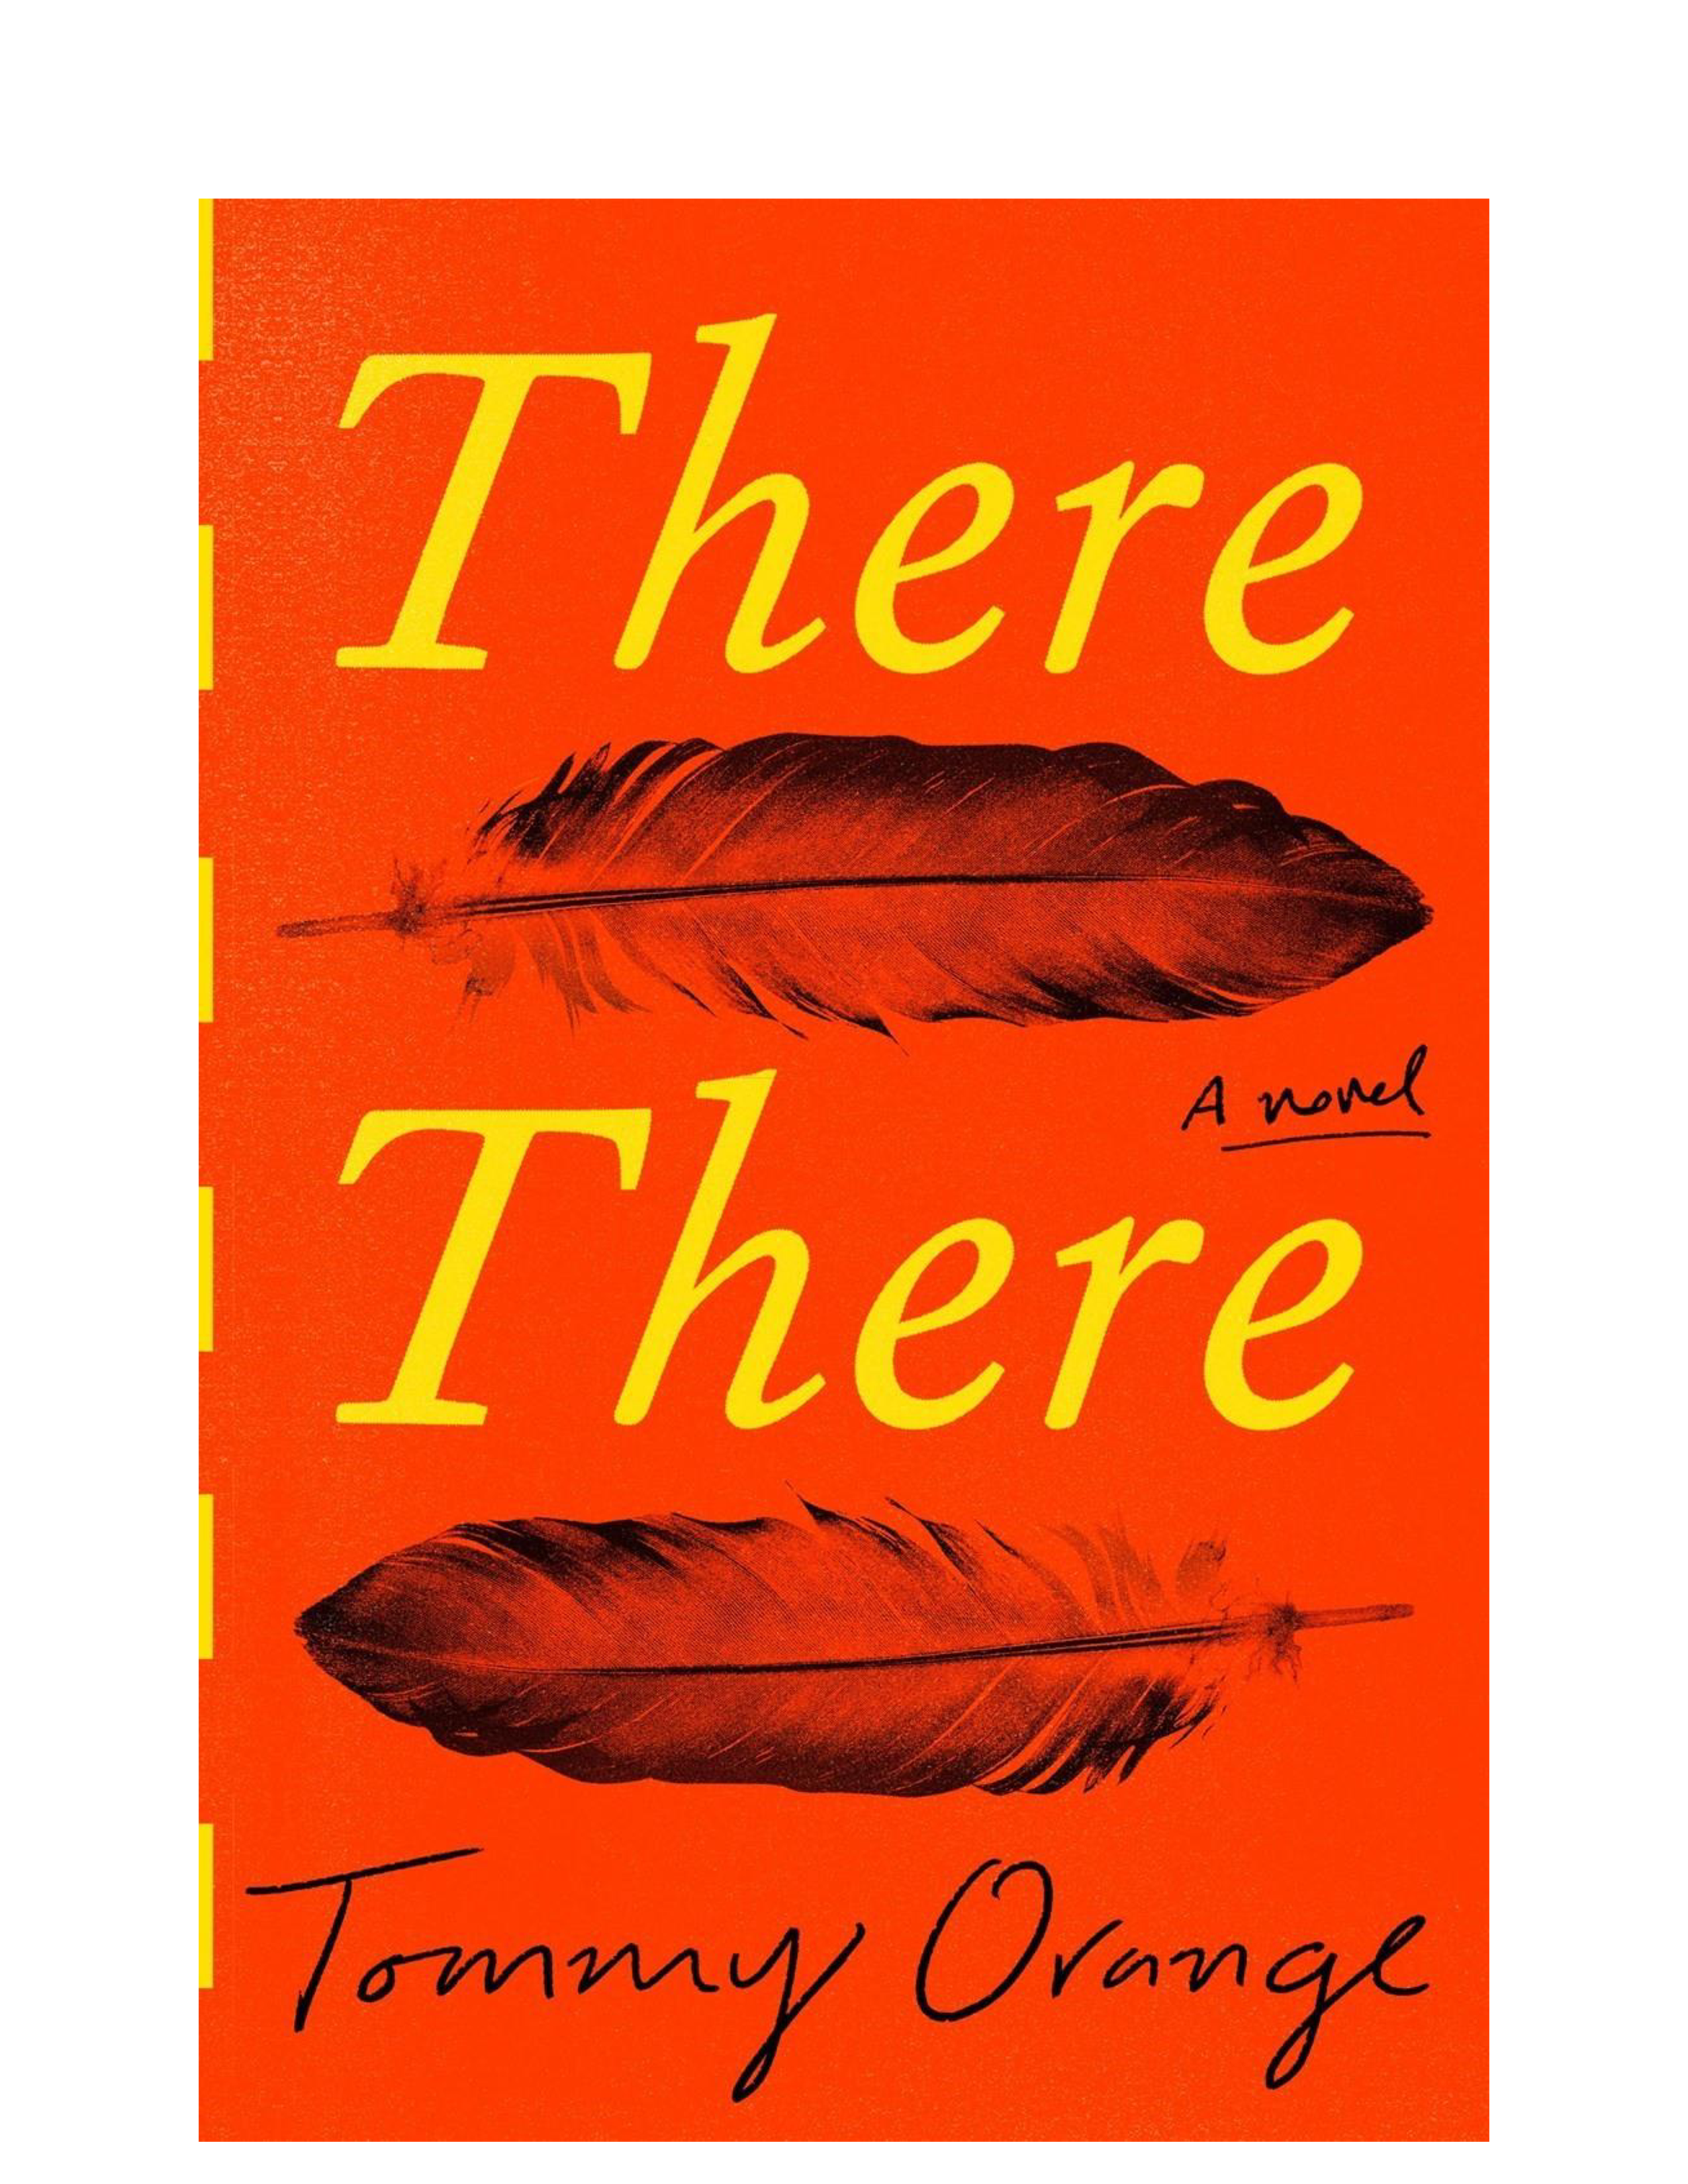 Cover of the book "There There" by Tommy Orange